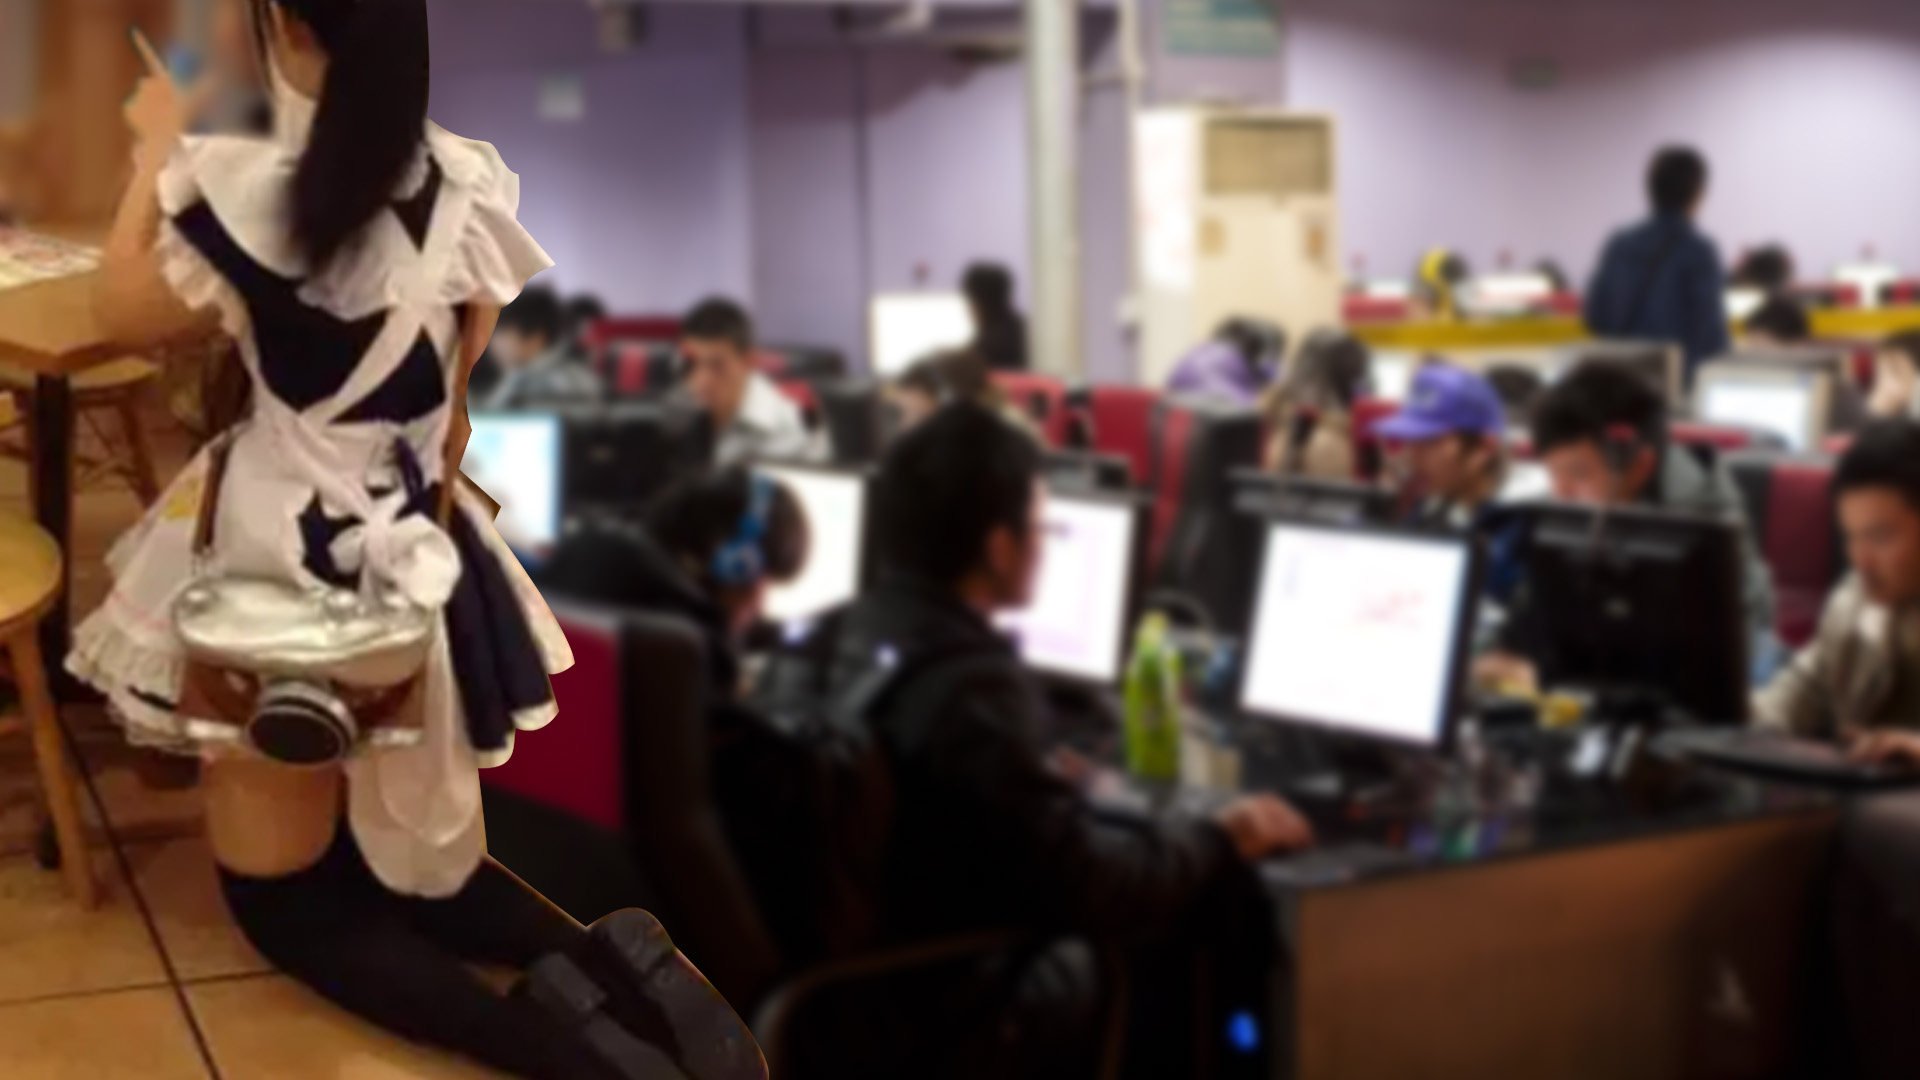 Esports cafes in China have been ordered to stop providing services which are “derogatory to the dignity” of women and which sexualise the workplace. Photo: SCMP composite/Shutterstock/Sohu